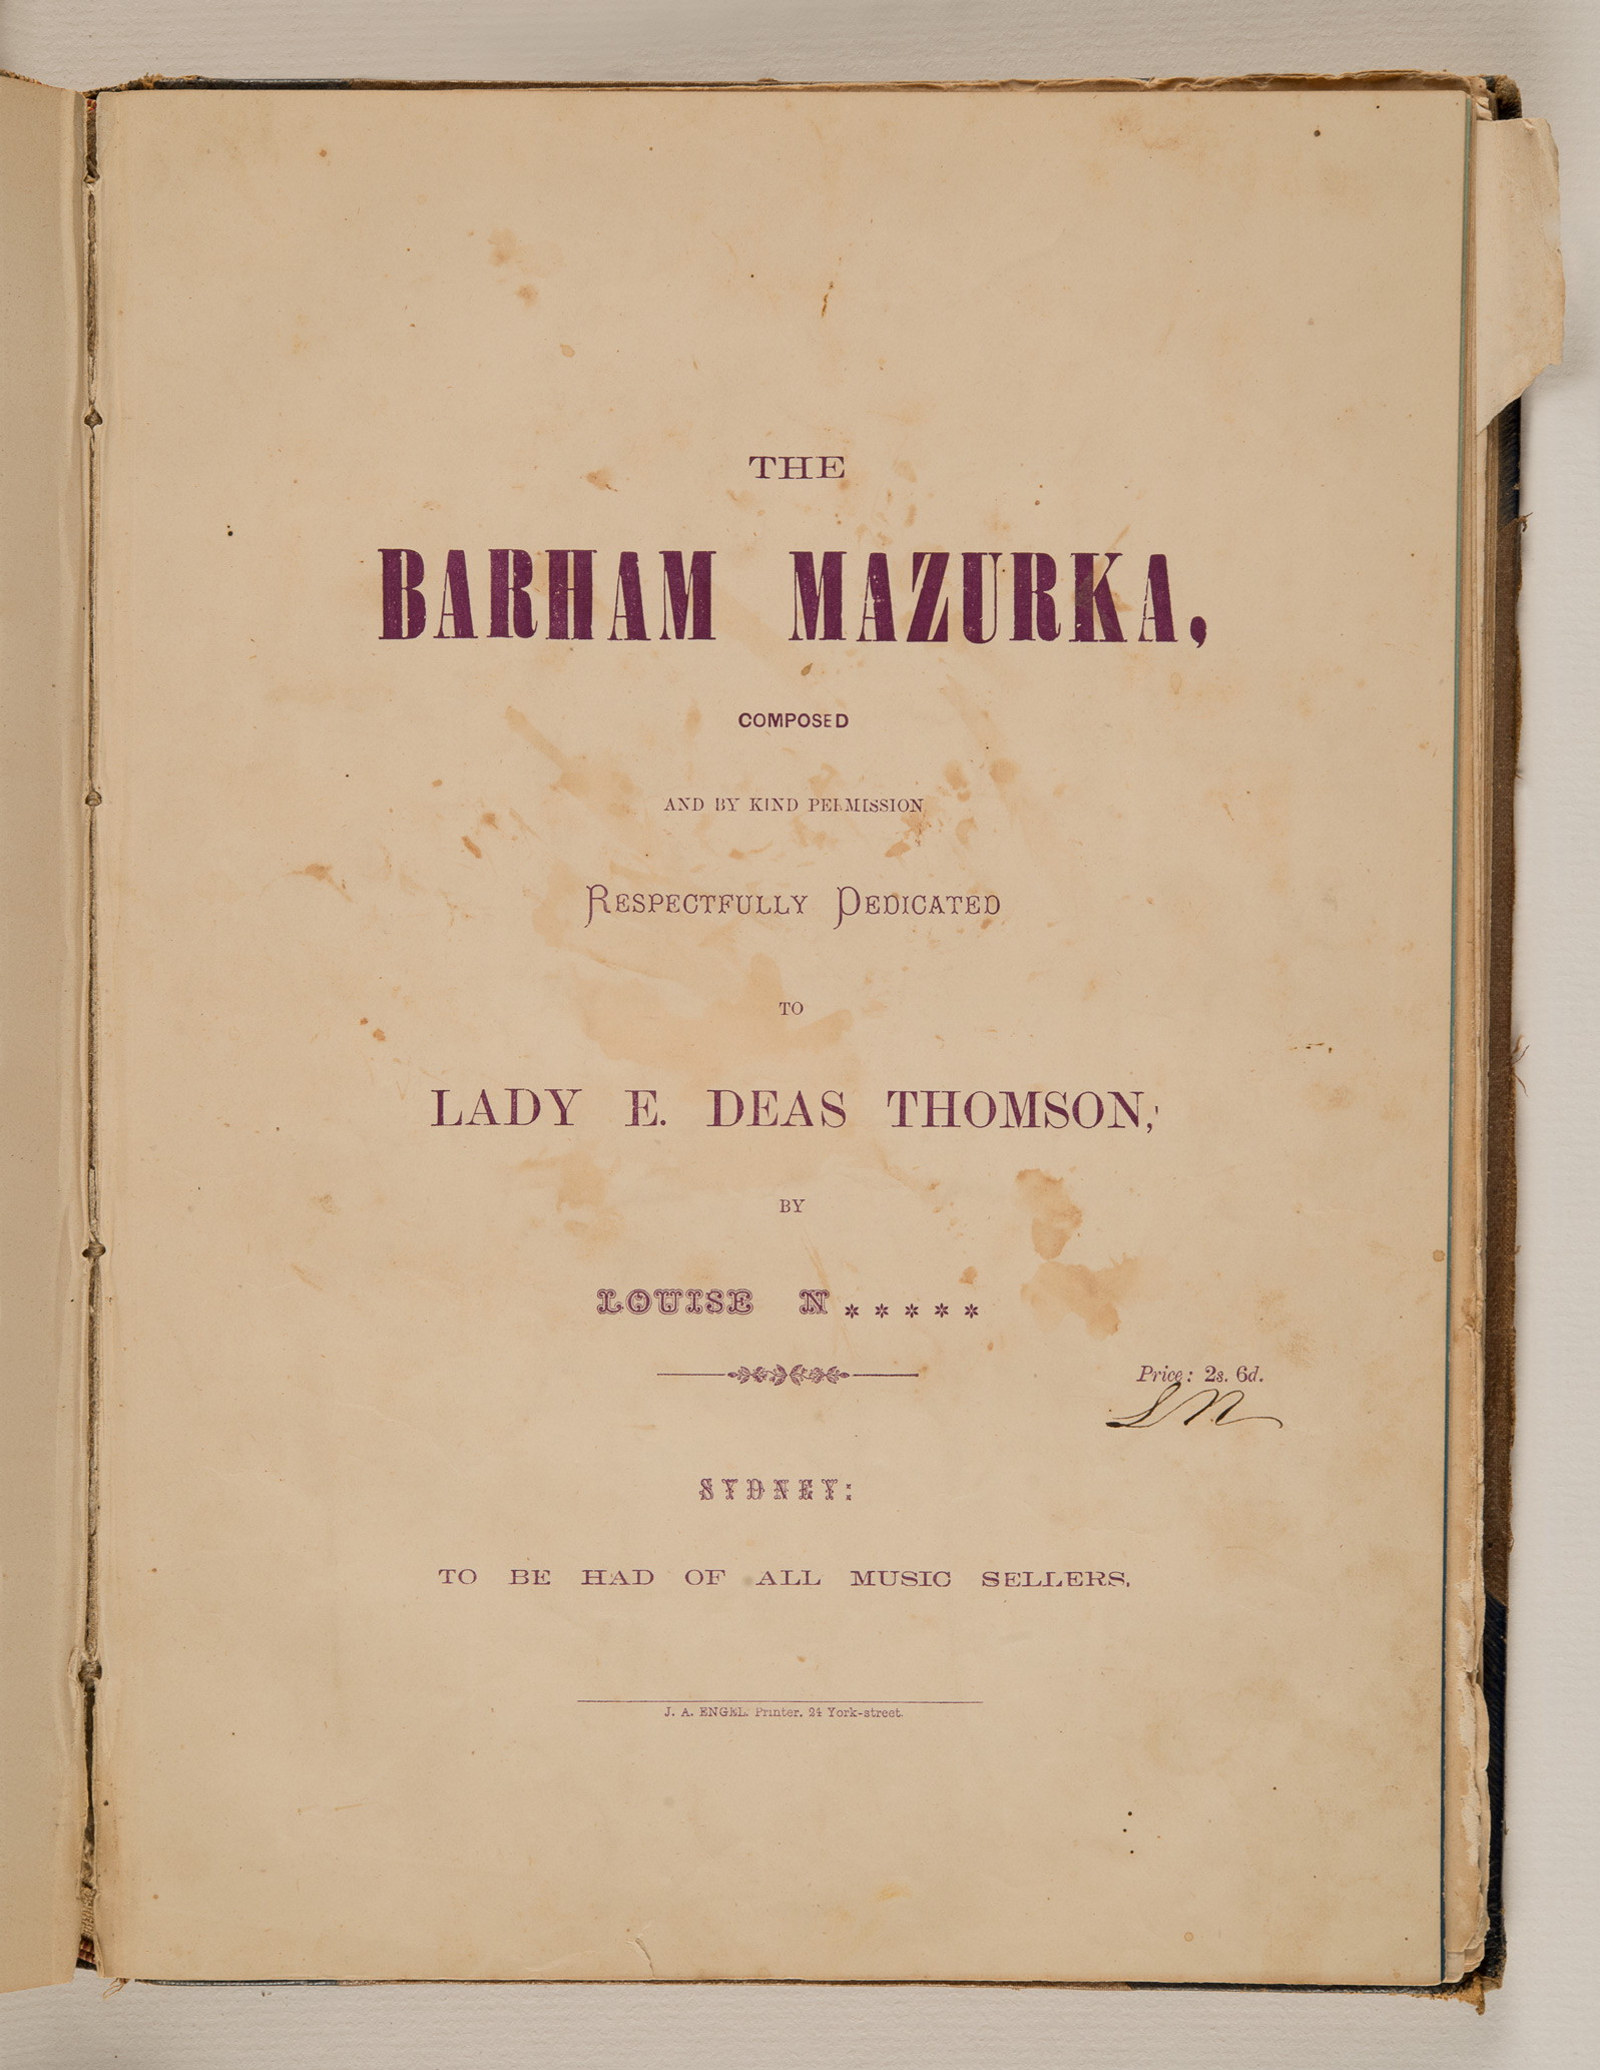 Sheet music, 'The Barham Mazurka', composed by Louise N, published 1876